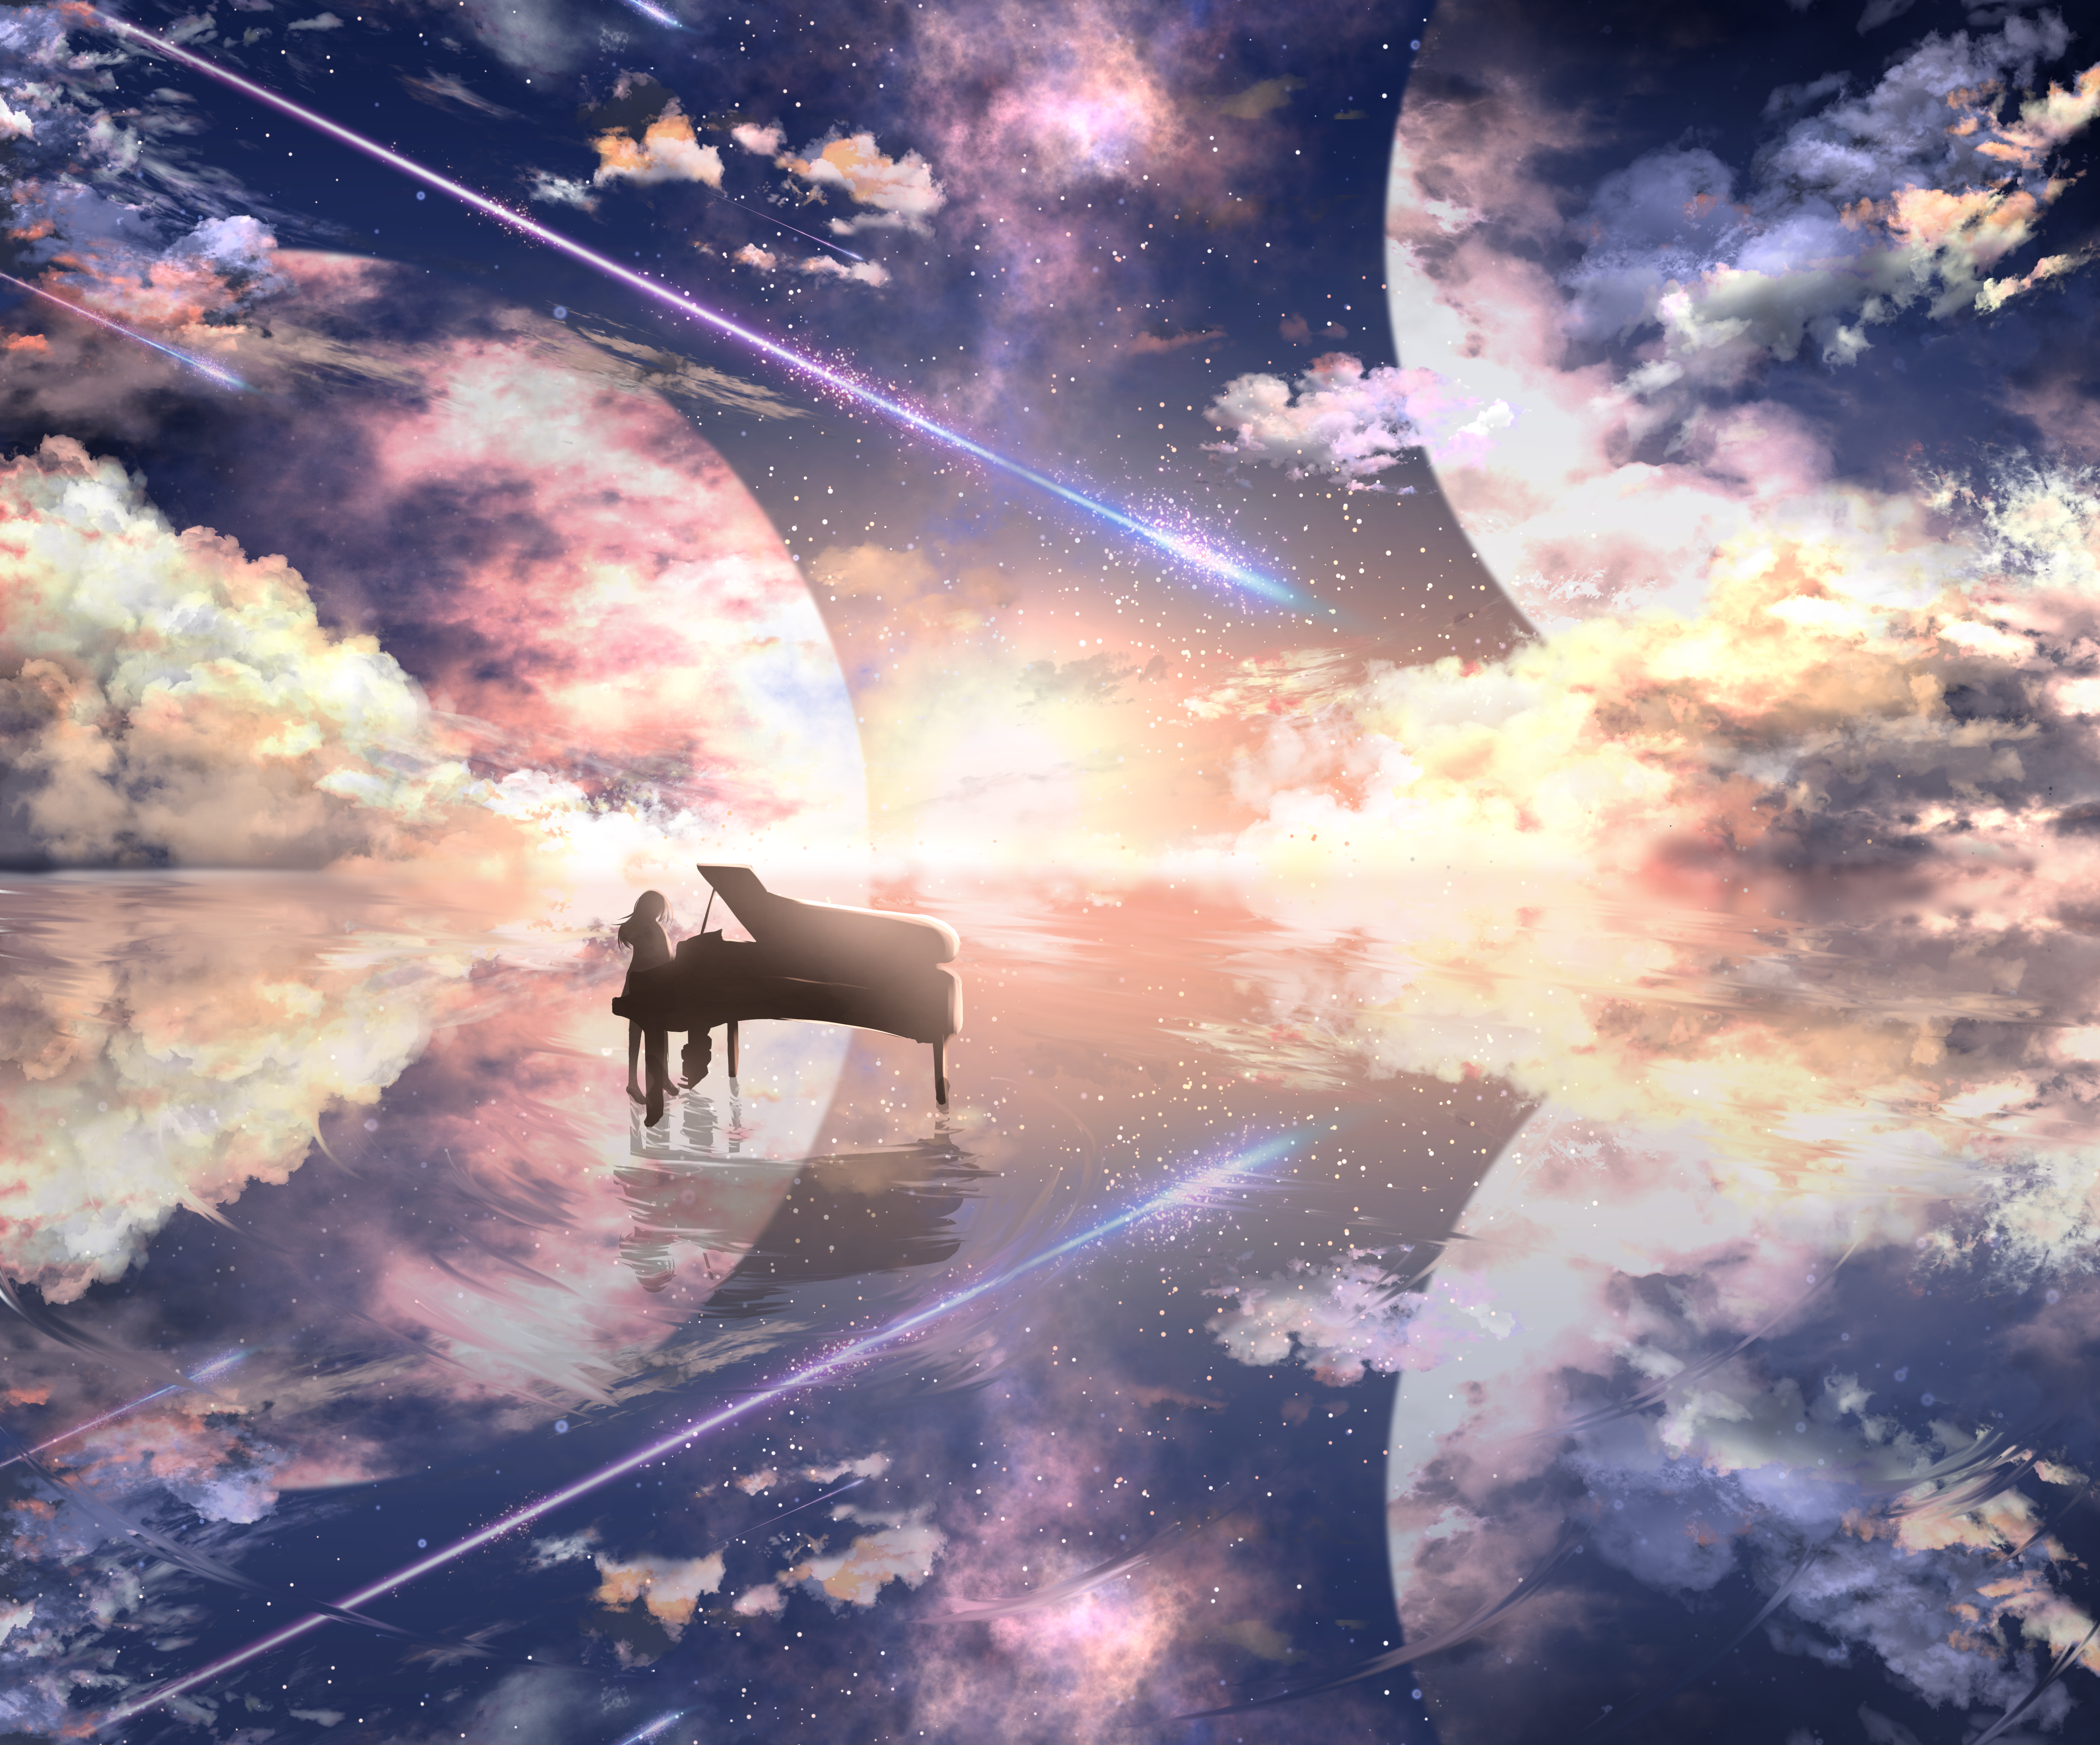 Anime girl playing a piano on a shallow lake, reflecting the planets above by ツチヤ